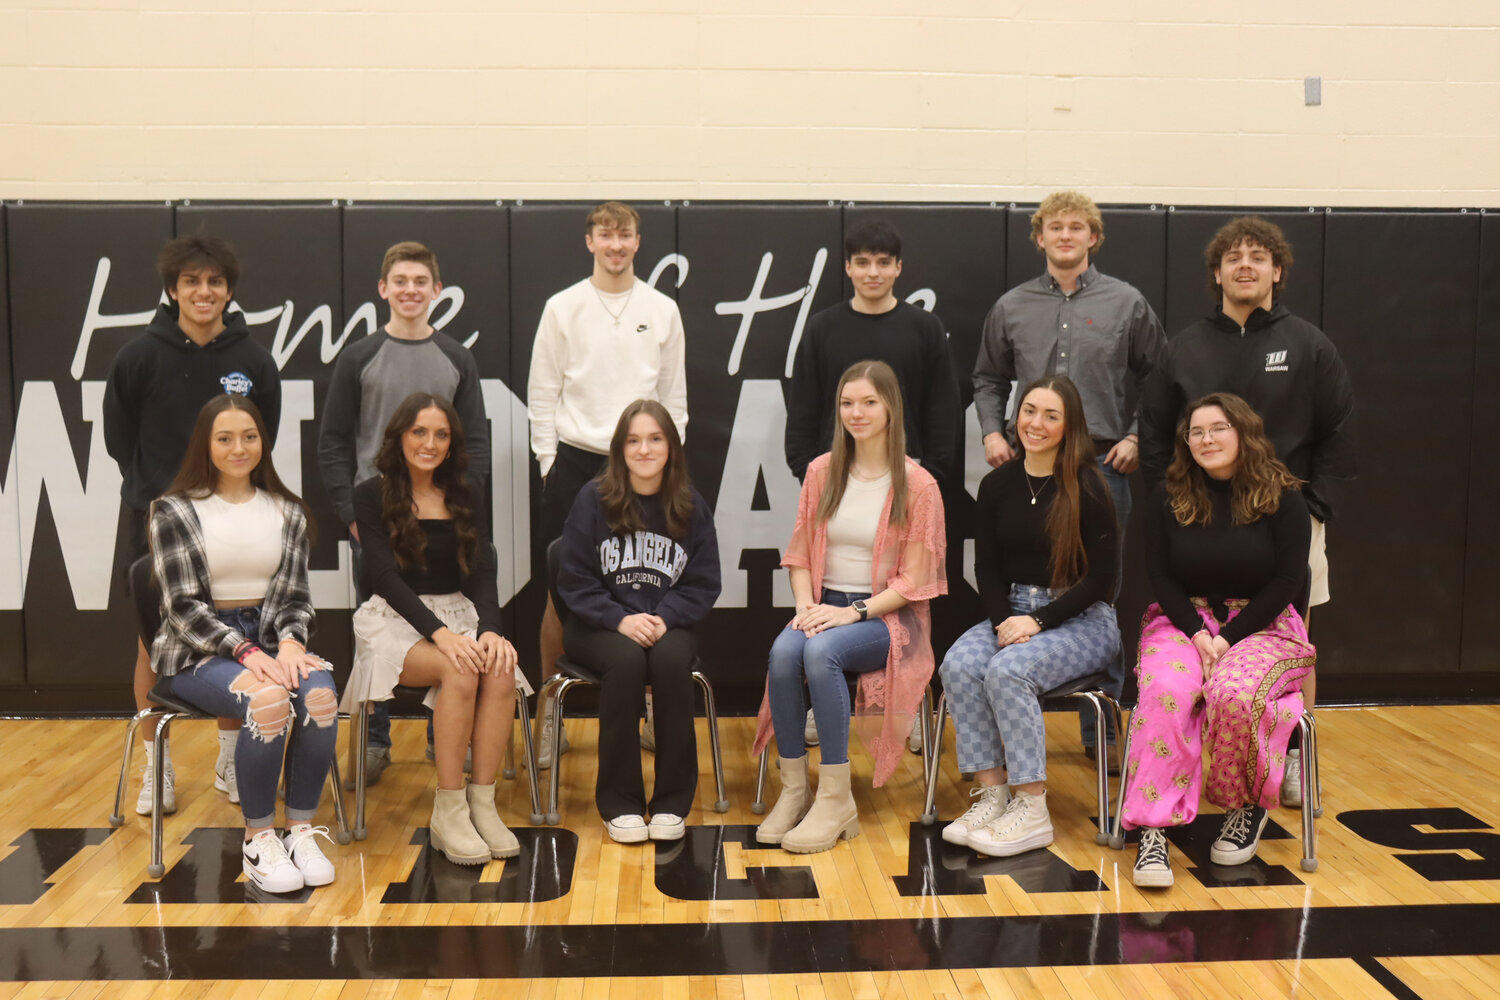 WHS COURTWARMING will be held on Friday night.  Royalty will be crowned at halftime of the Boys Varsity game.  Candidates include: (front row) princess candidates, juniors Keira Mostaffa, Tatum Bohl and Sonia Lasseigne, queen candidates seniors Grace Drake, Angela Konopasek and Abbi Flinn; (back row) prince candidates juniors Bradley Watson, Jaxson Deckard and Logan Gemes, king candidates seniors Zane Huffman, Dylan Elmer and Devon Boul. Courtwarming is Friday, Feb. 9 at WHS.